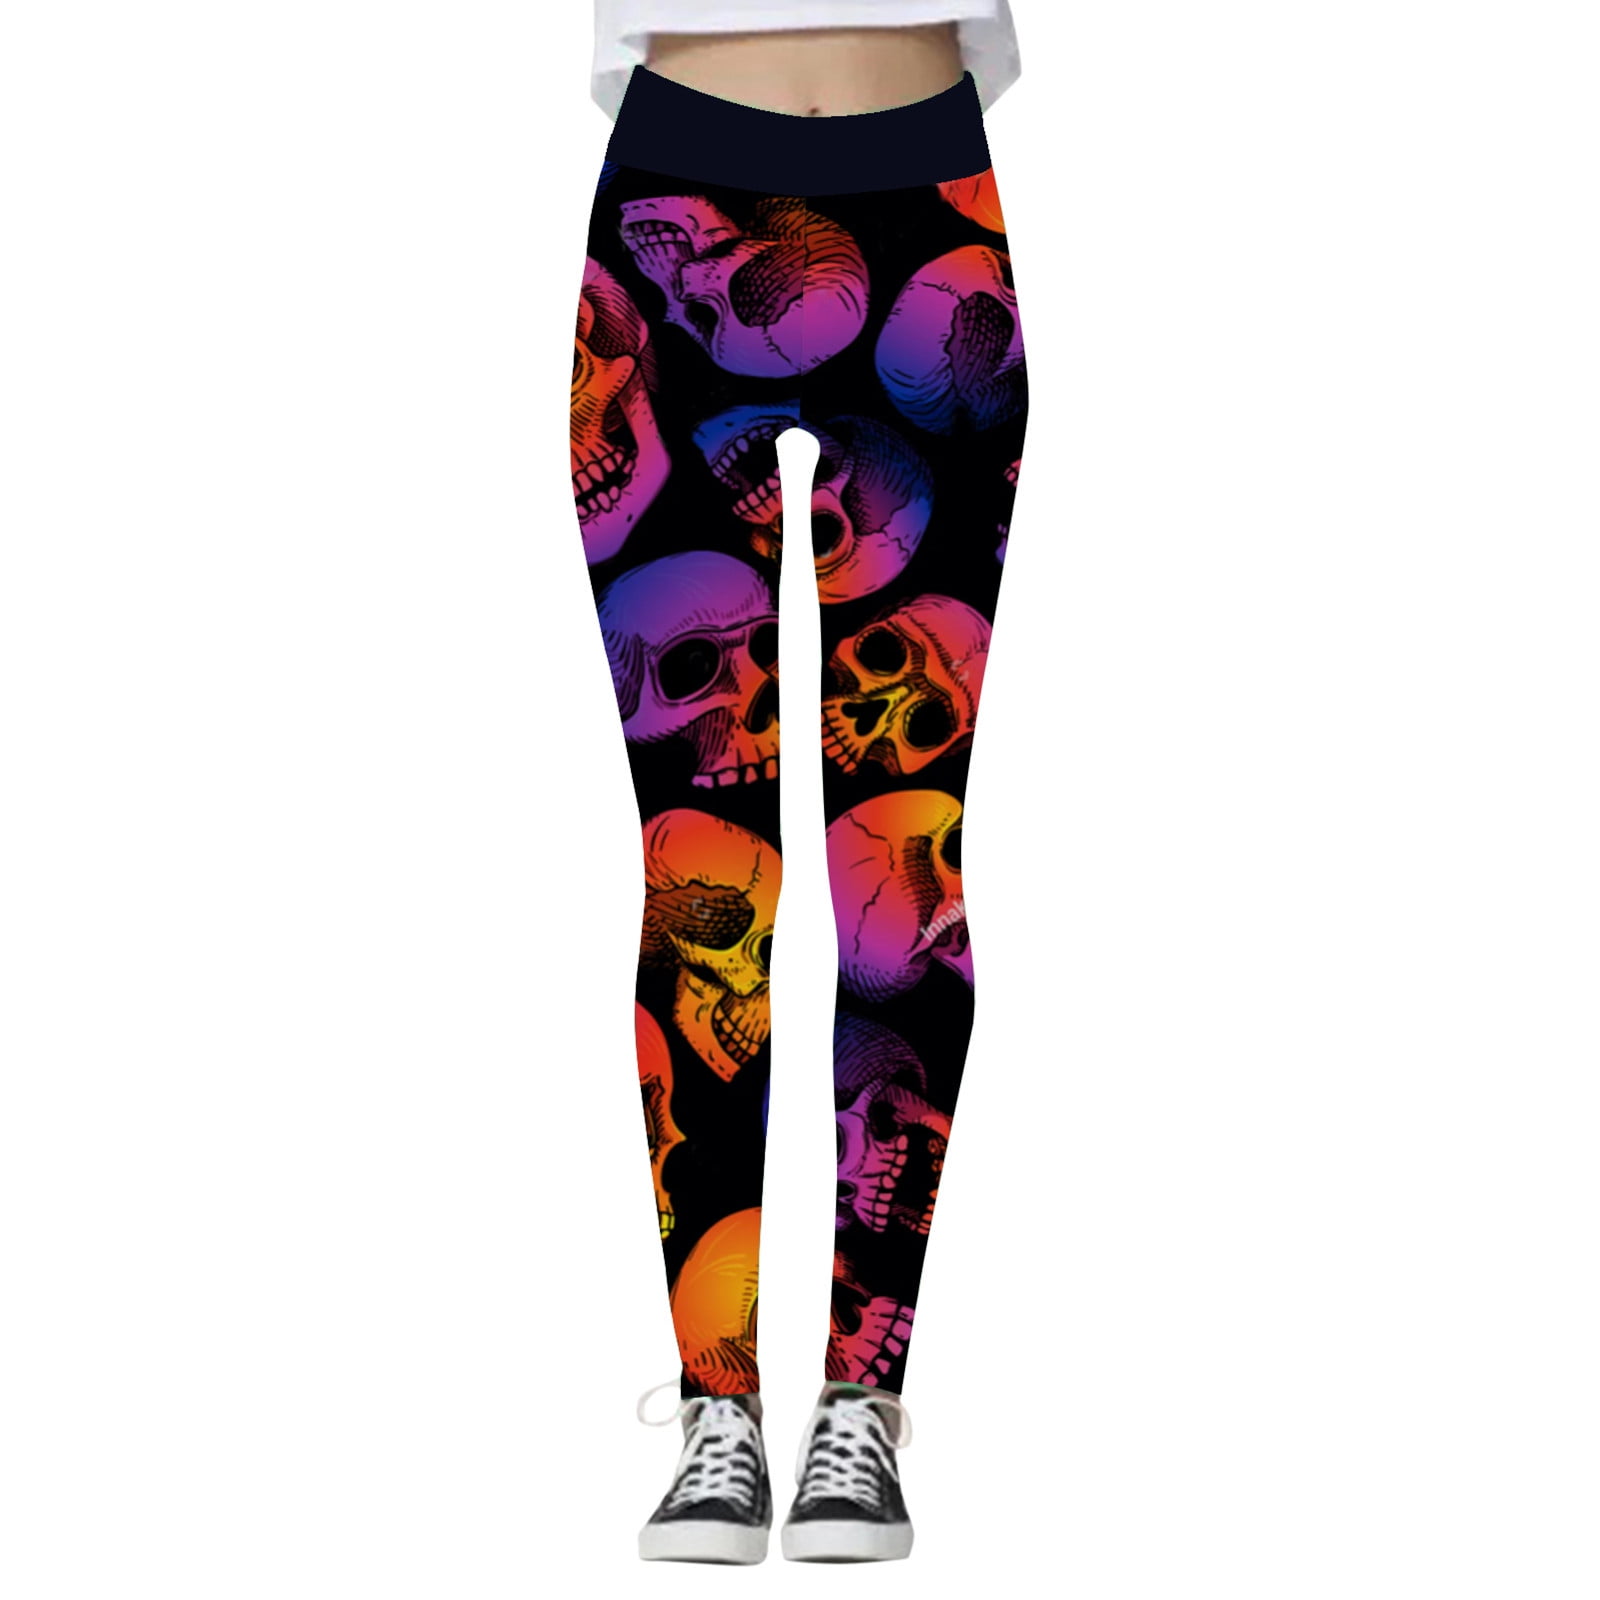 HSMQHJWE Yoga Pants with Pockets for Women plus Size Tall Print Collection  High Waist Women's Leggings Compression Pants Yoga Running Gym And Everyday